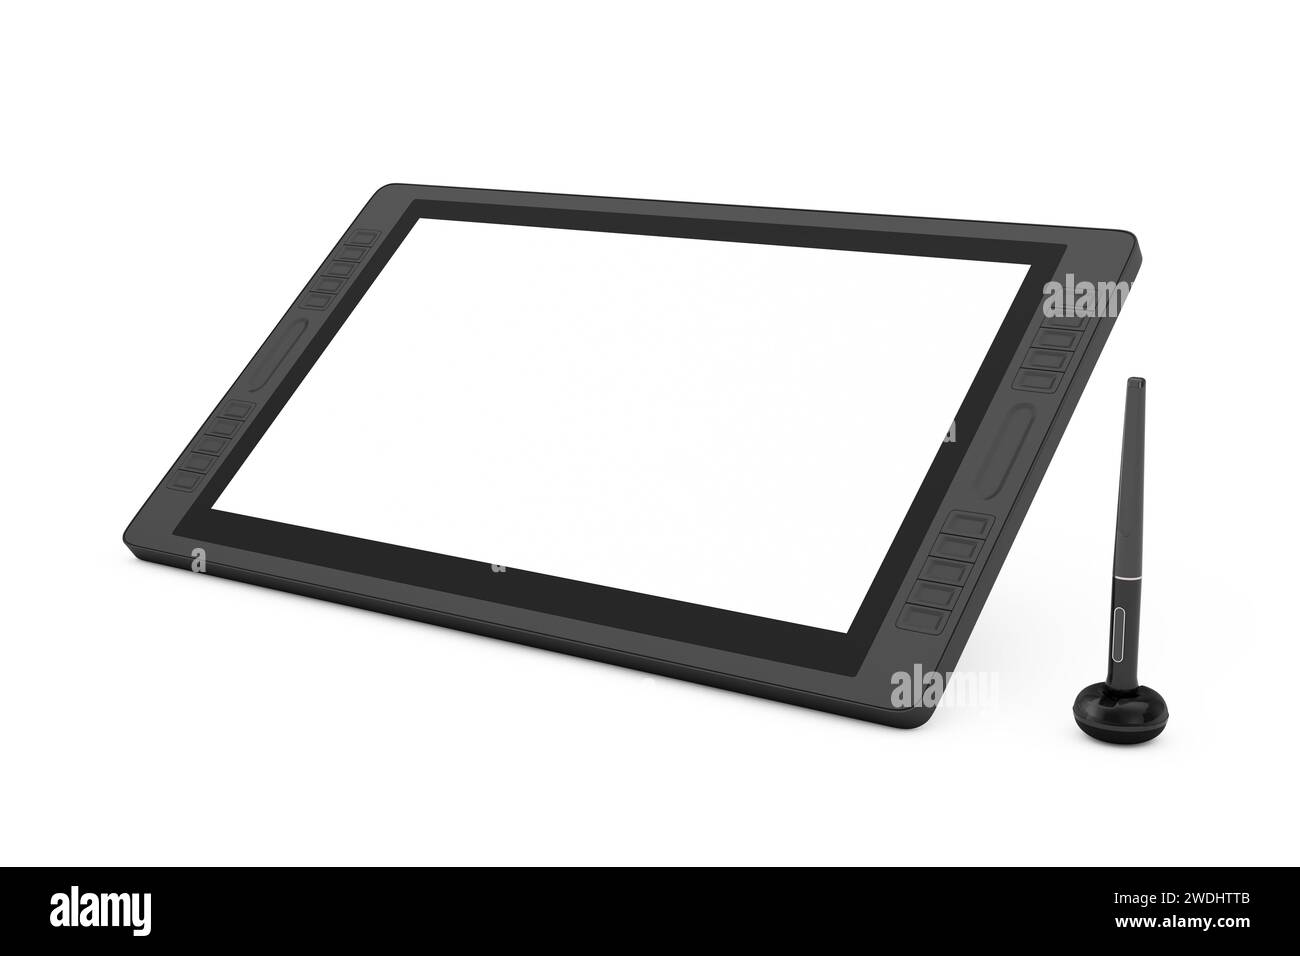 Big Size of Digital Graphics Drawing Tablet Monitor with Pen and Blank Screen for Your Design on a white background. 3d Rendering Stock Photo